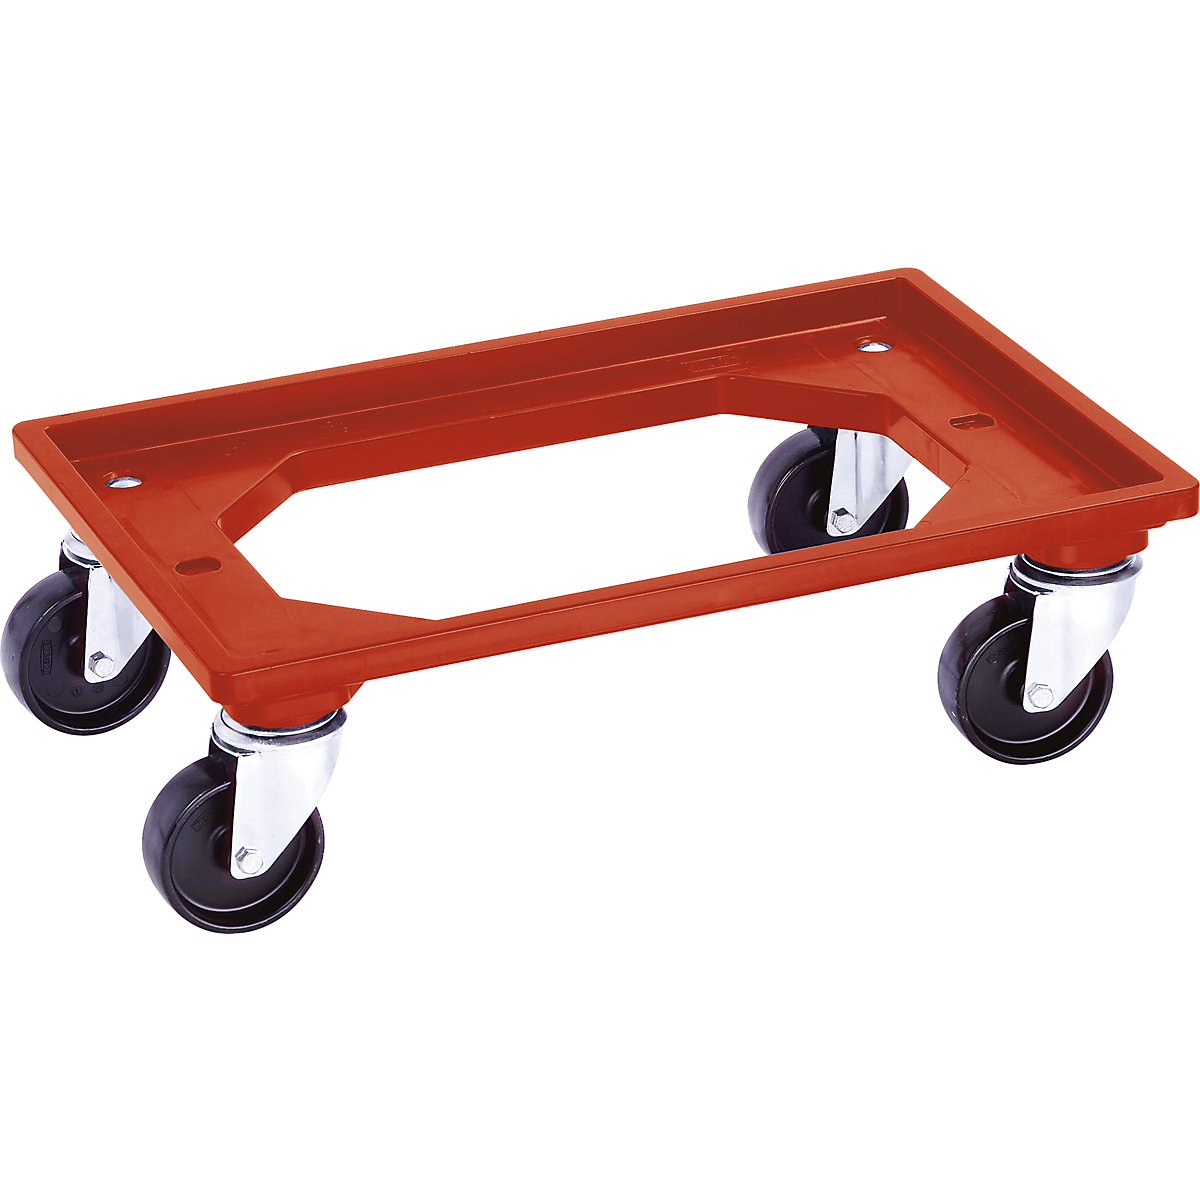 Plastic dolly, 600 x 400 mm, max. load 250 kg, red, 5+ items-1